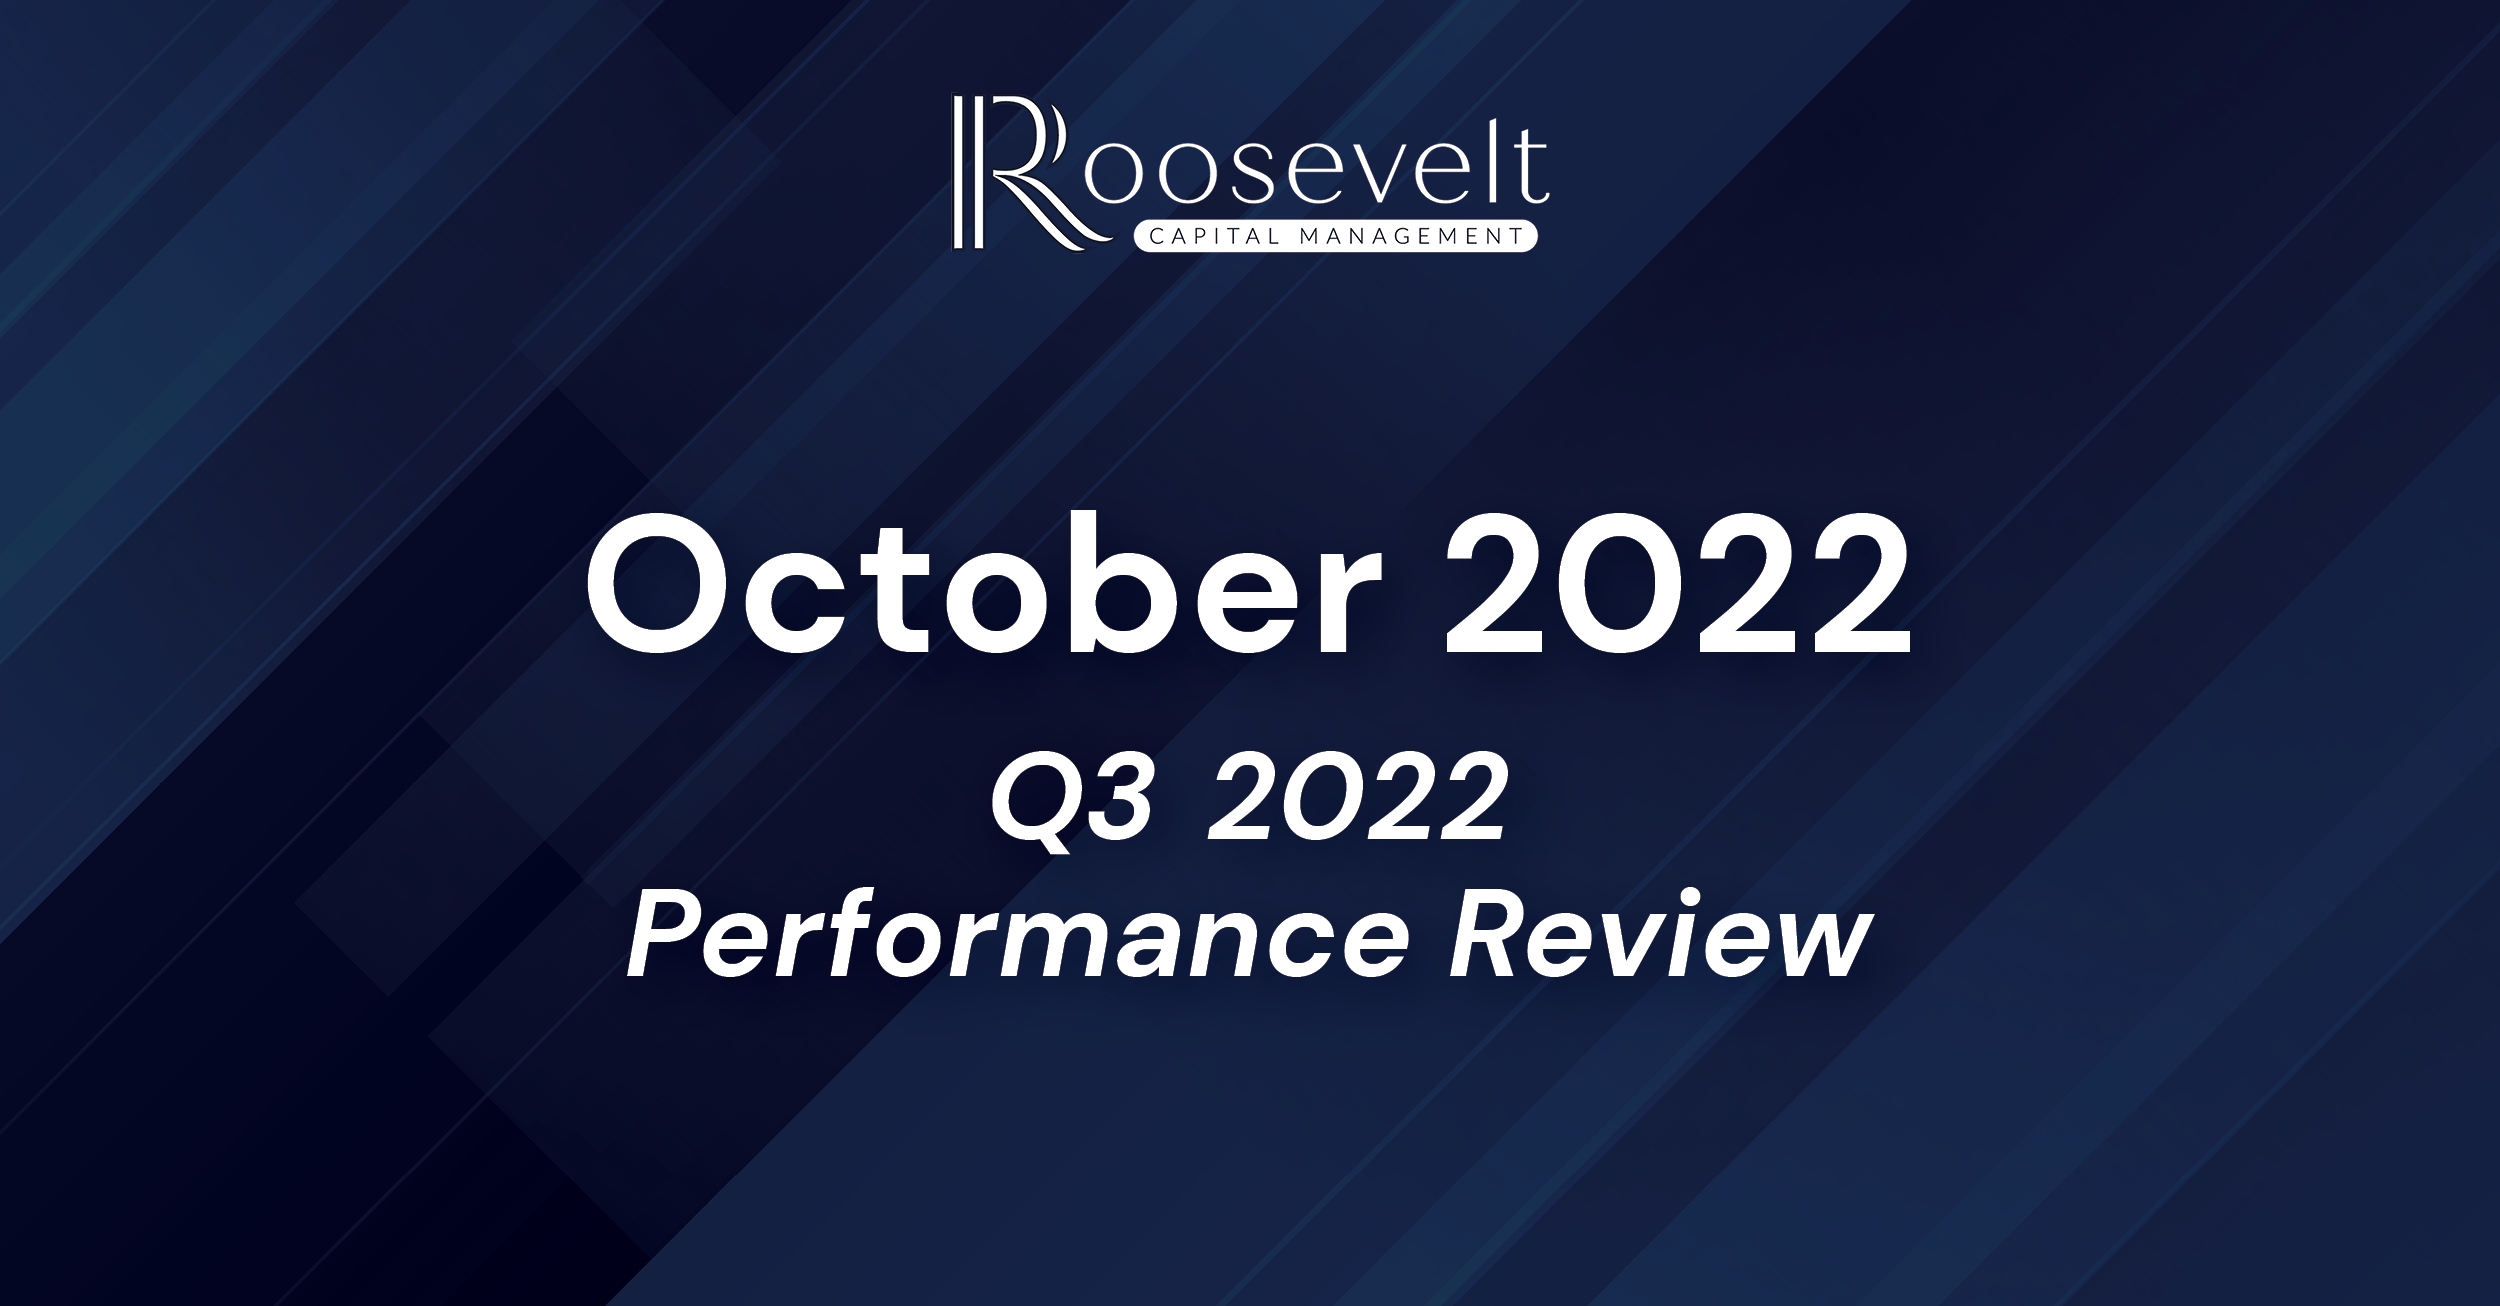 October 2022 - Q3 2022 Performance Review